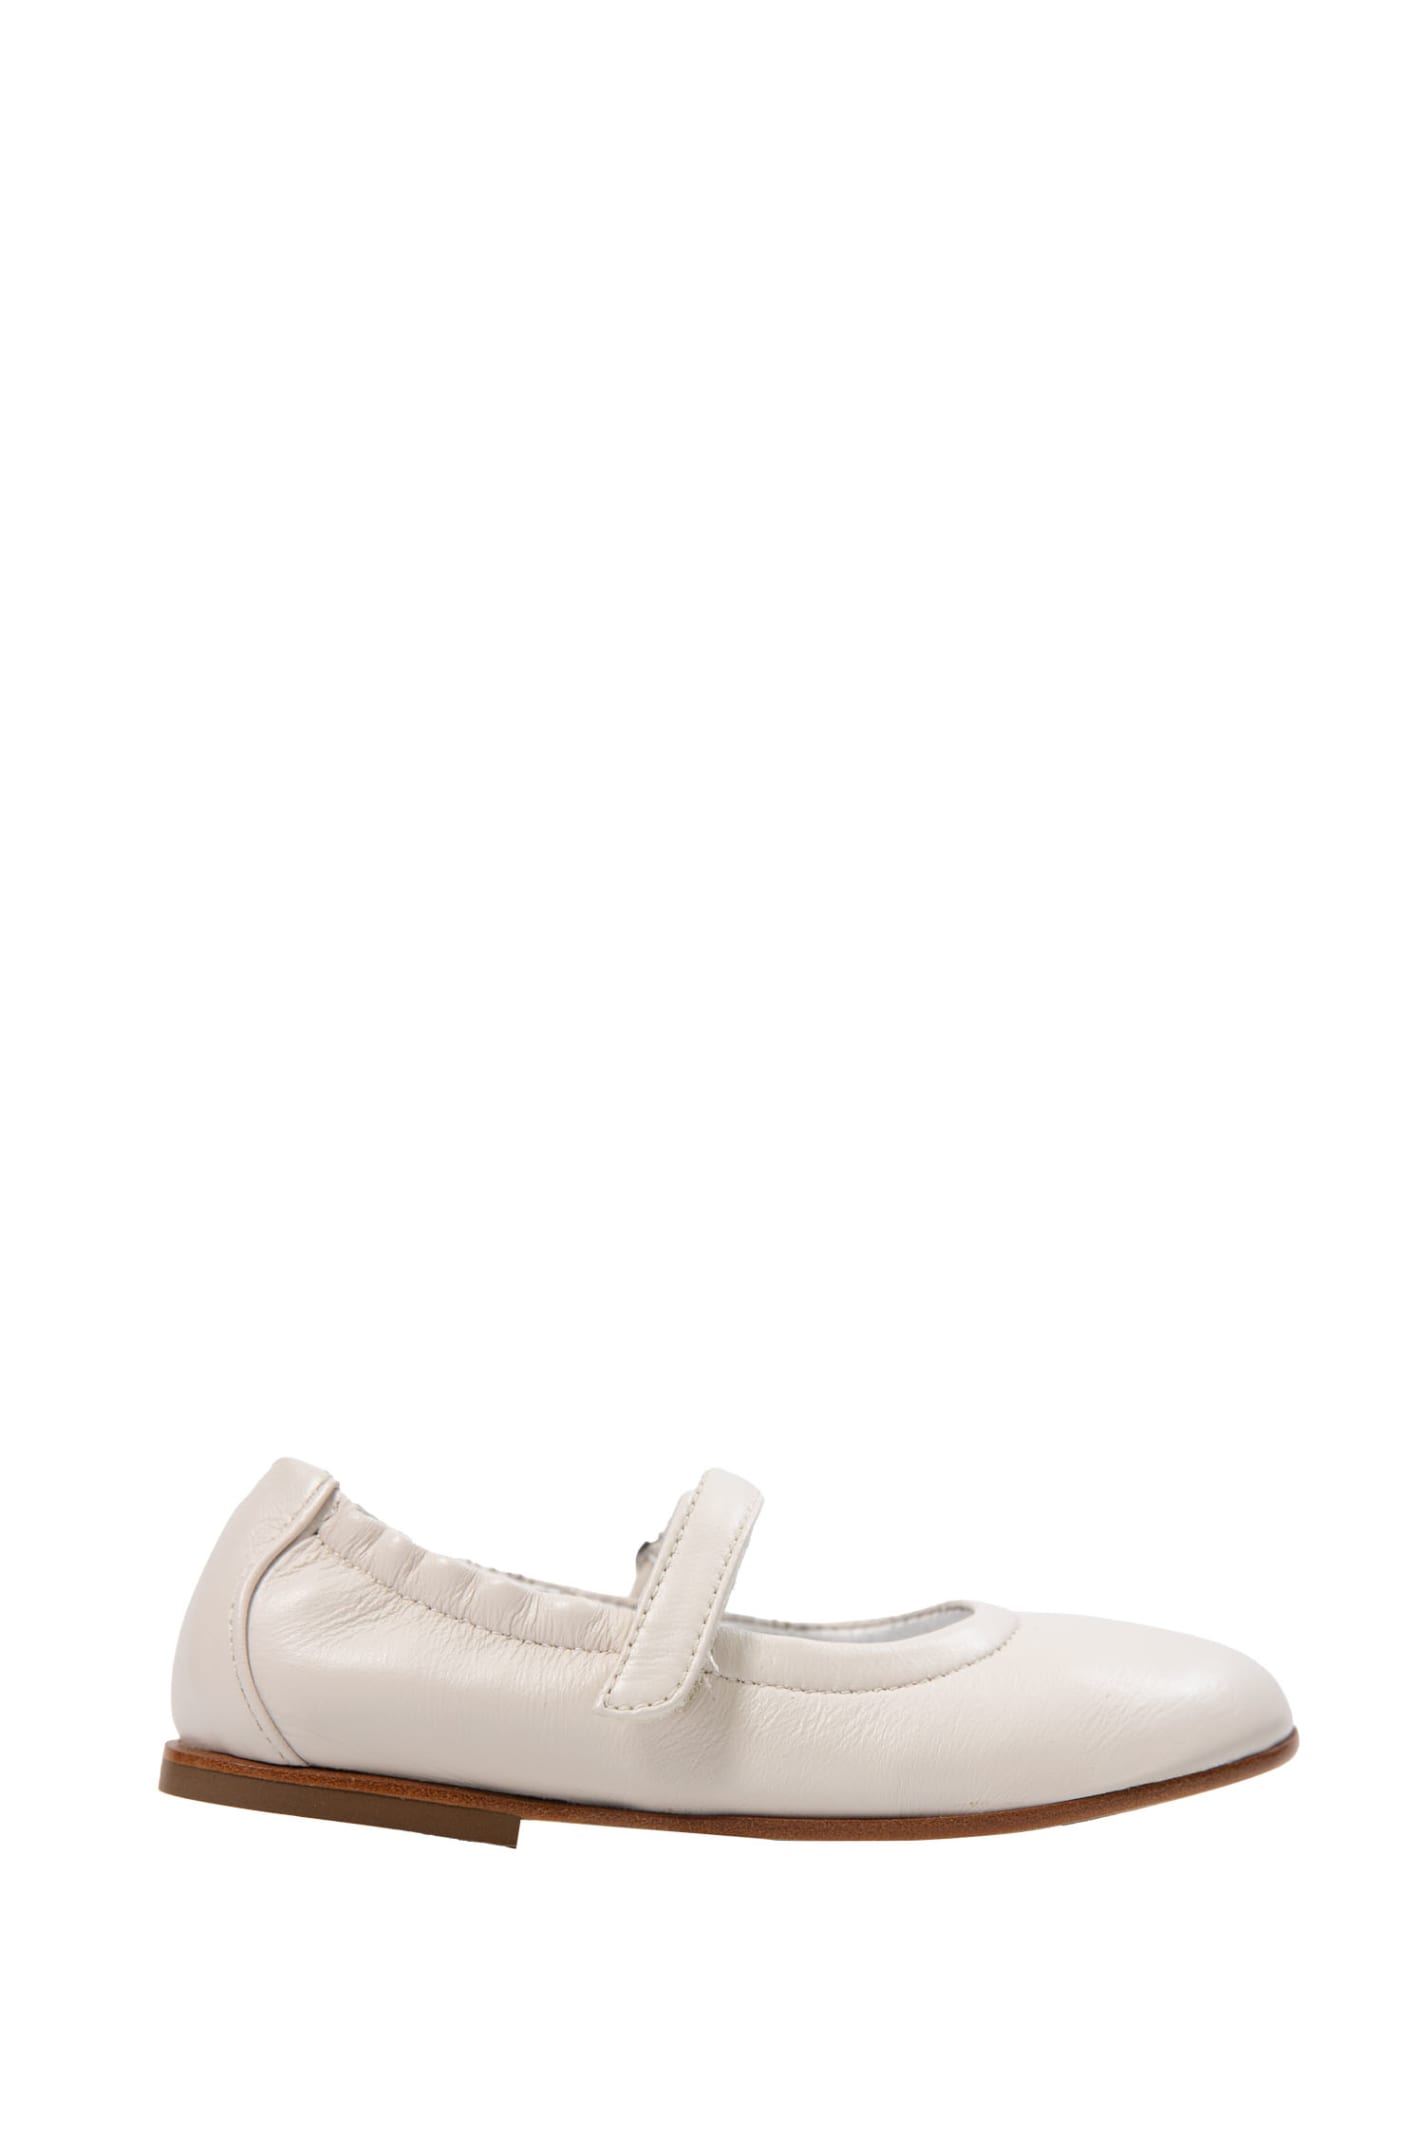 Andrea Montelpare Kids' Leather Shoes